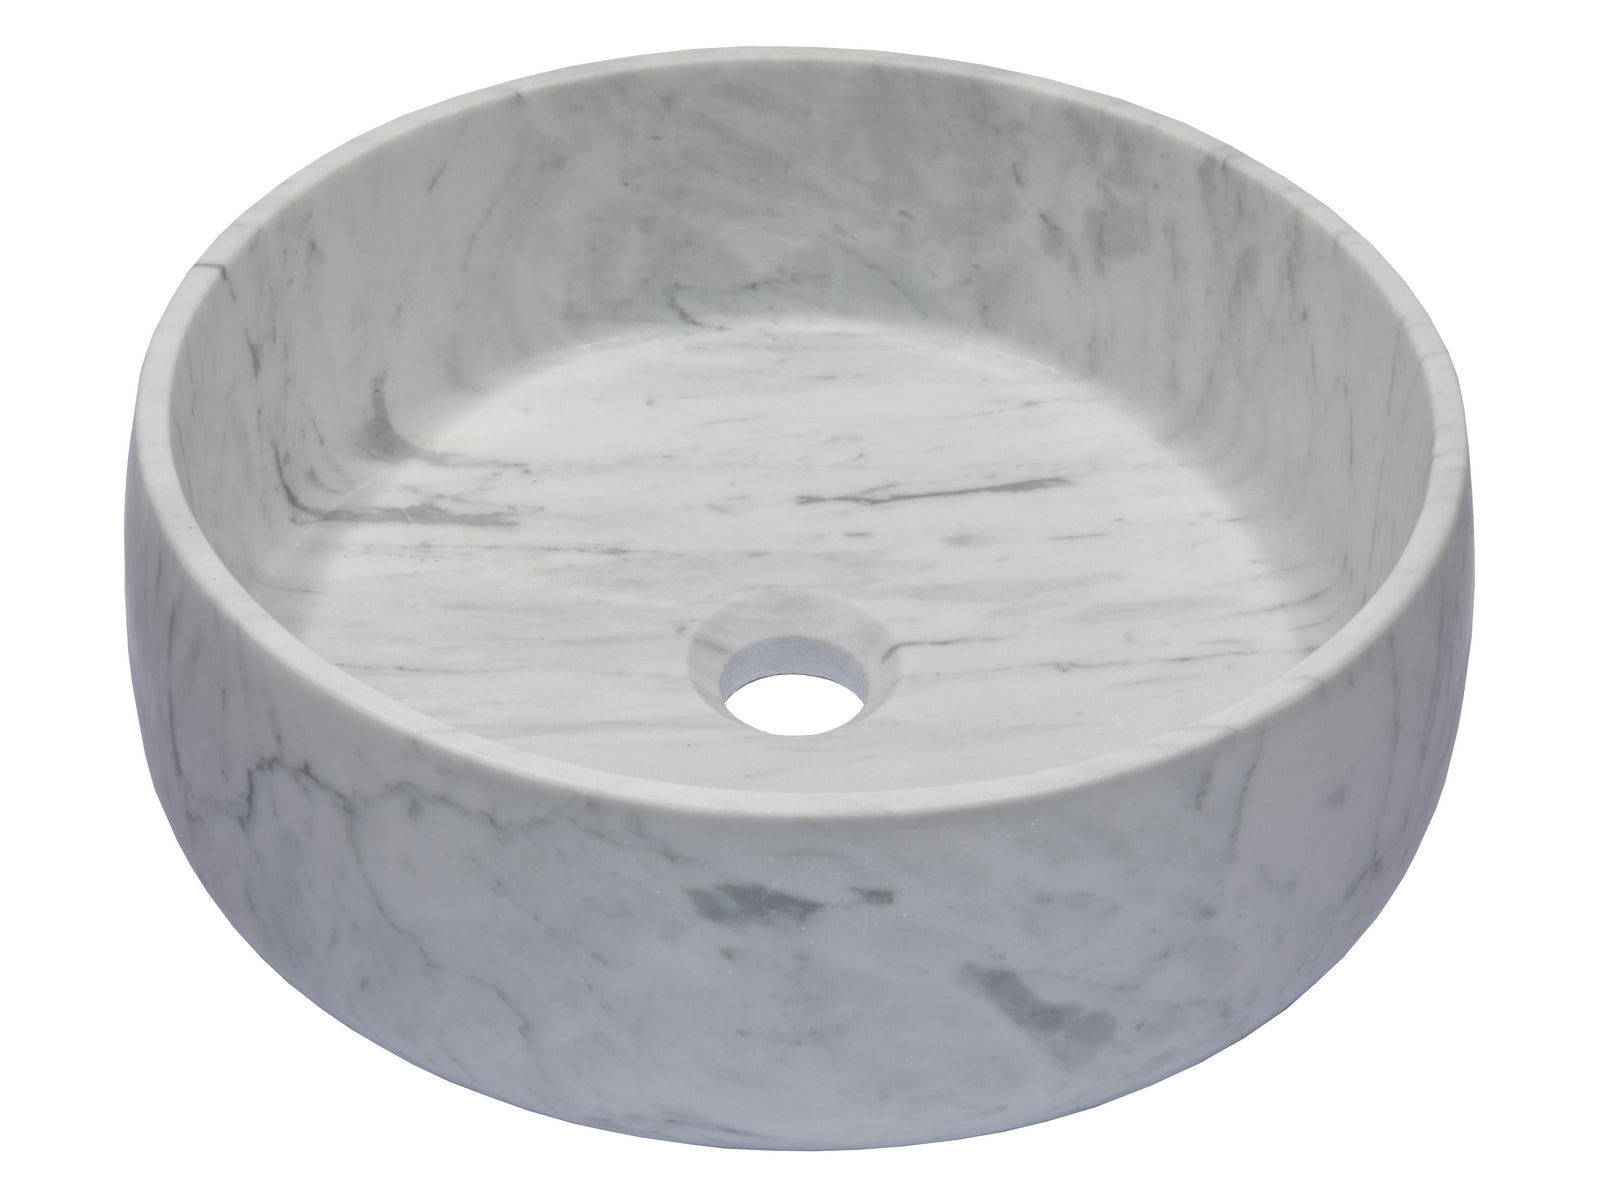 Rounded Vessel Sink in White Carrara Marble